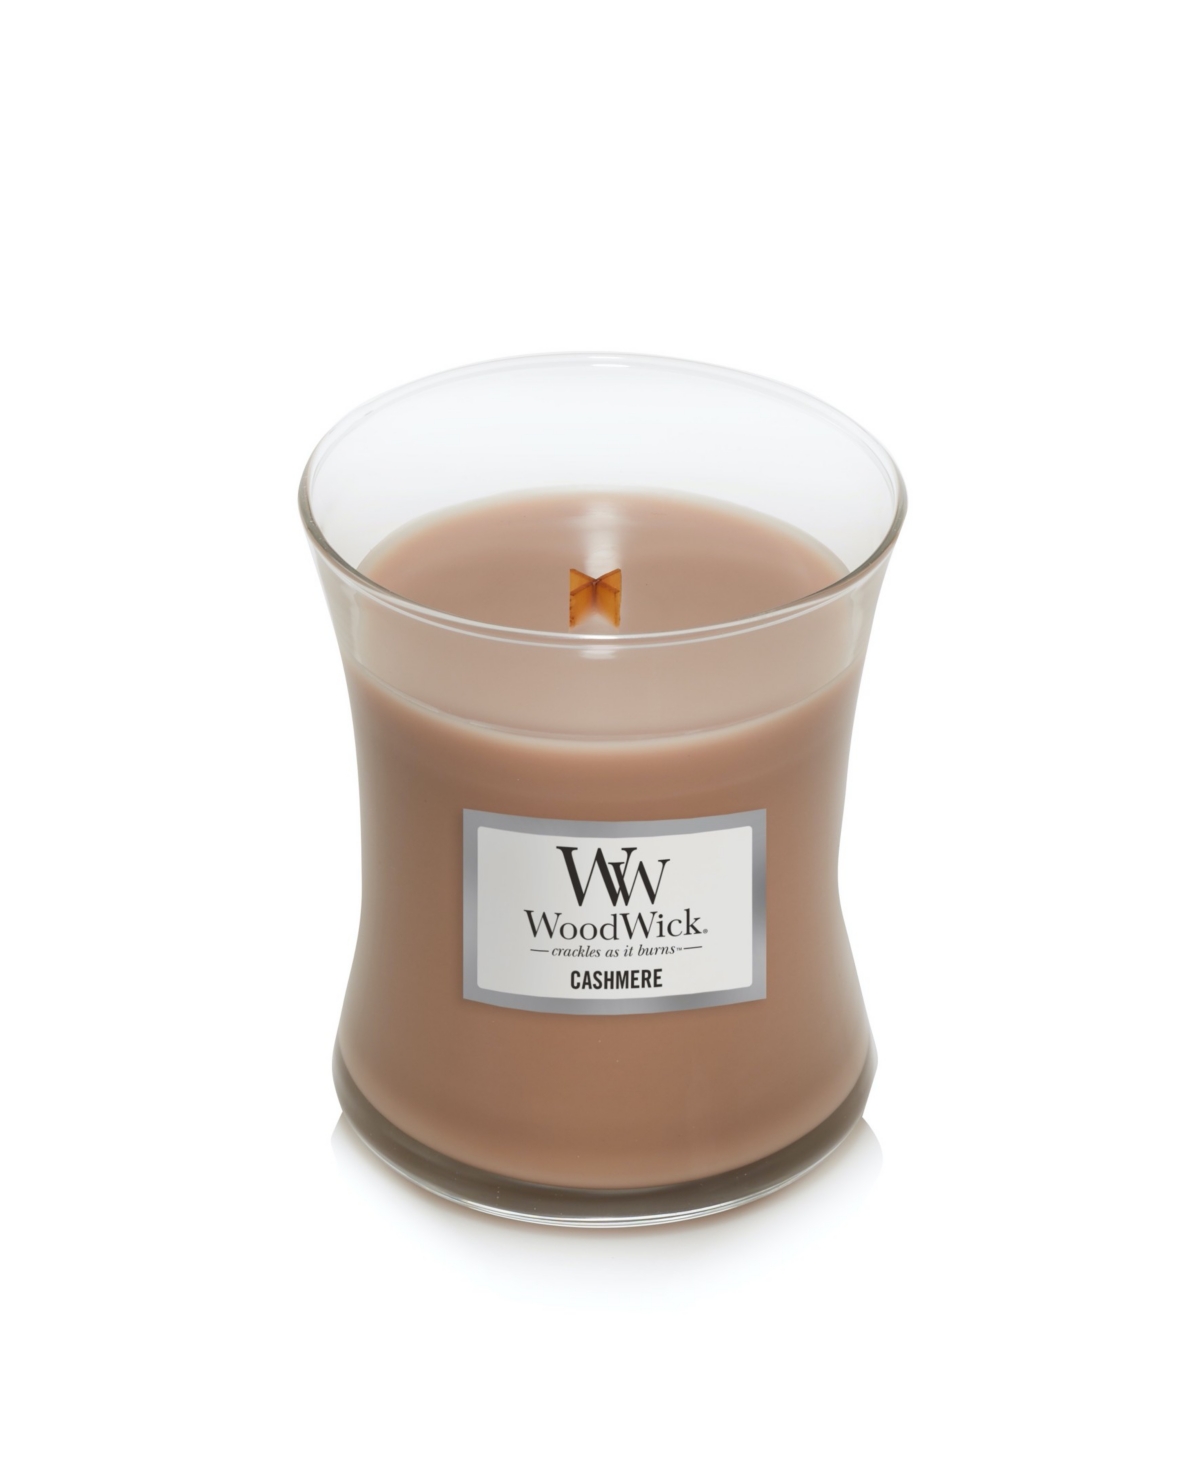 Shop Woodwick Candle Woodwick Cashmere Medium Hourglass Candle, 9.7 oz